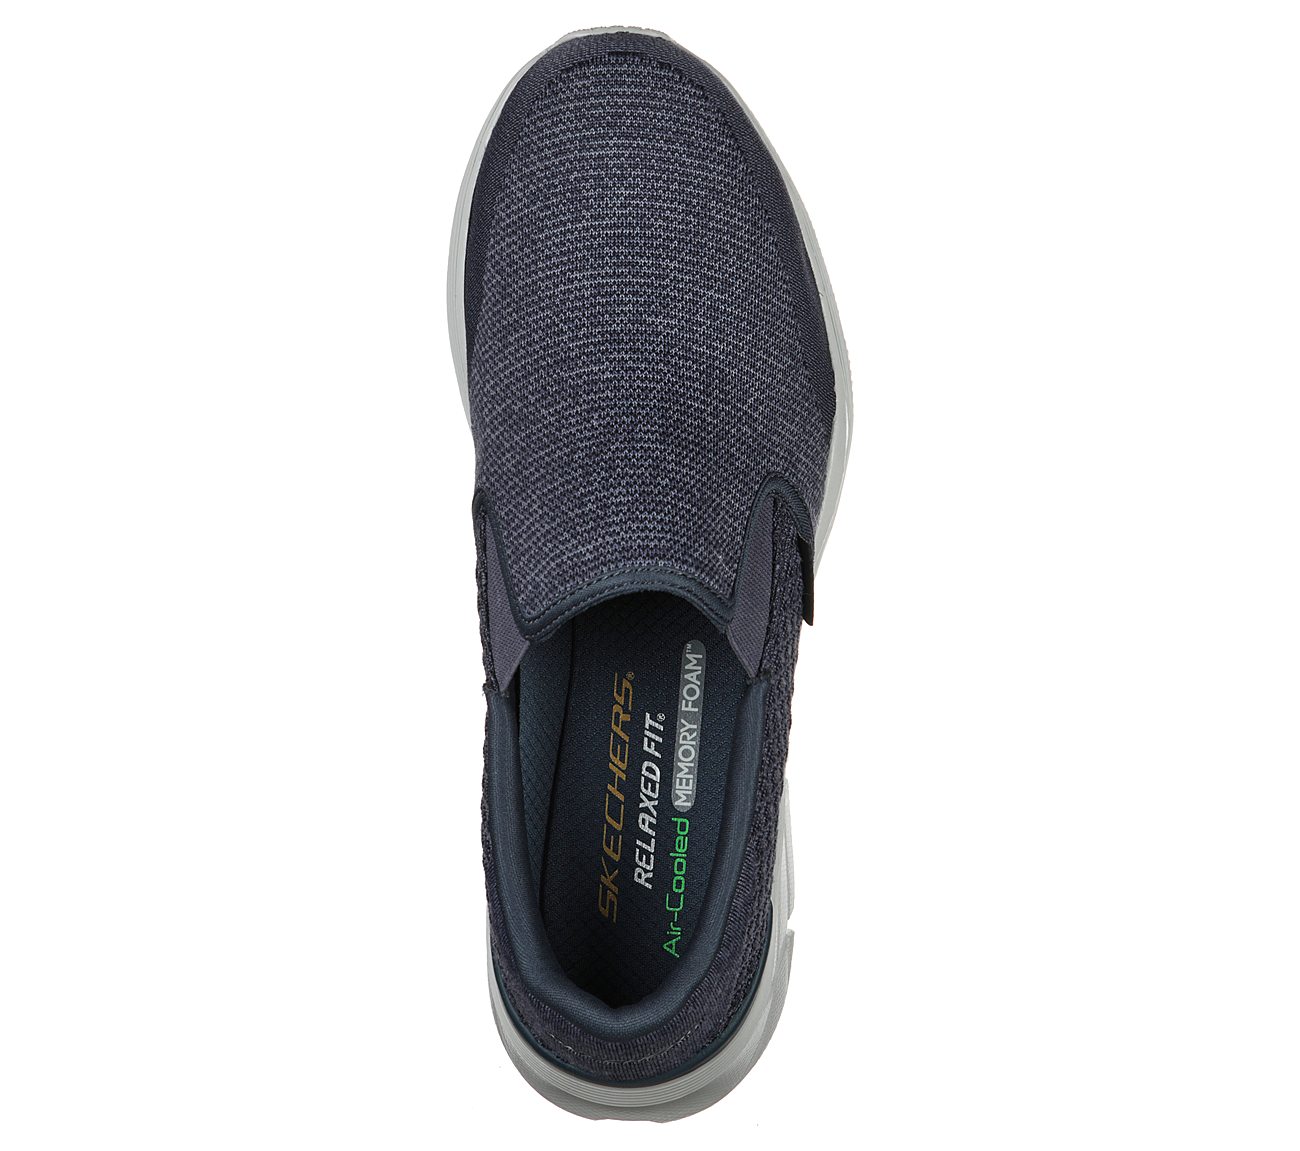 EQUALIZER 4.0 - REVIVIFY, NAVY/GREY Footwear Top View